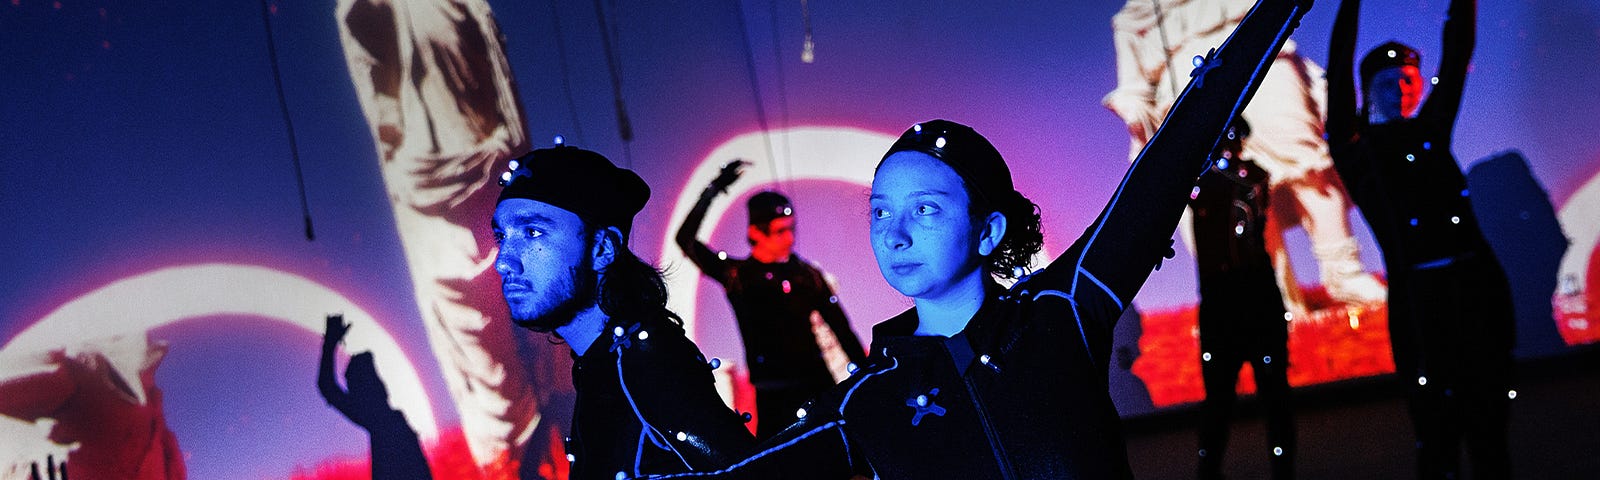 Isaiah Griffith and Marley Hewitt, second-year students in the Carson Emerging Media Arts program, pose in Mo-Cap (motion capture) suits with a group of students being filmed. The suits with their infrared sensors (round dots vecroed to the suit) allow a ring of cameras to turn their motion into animated characters on screen.